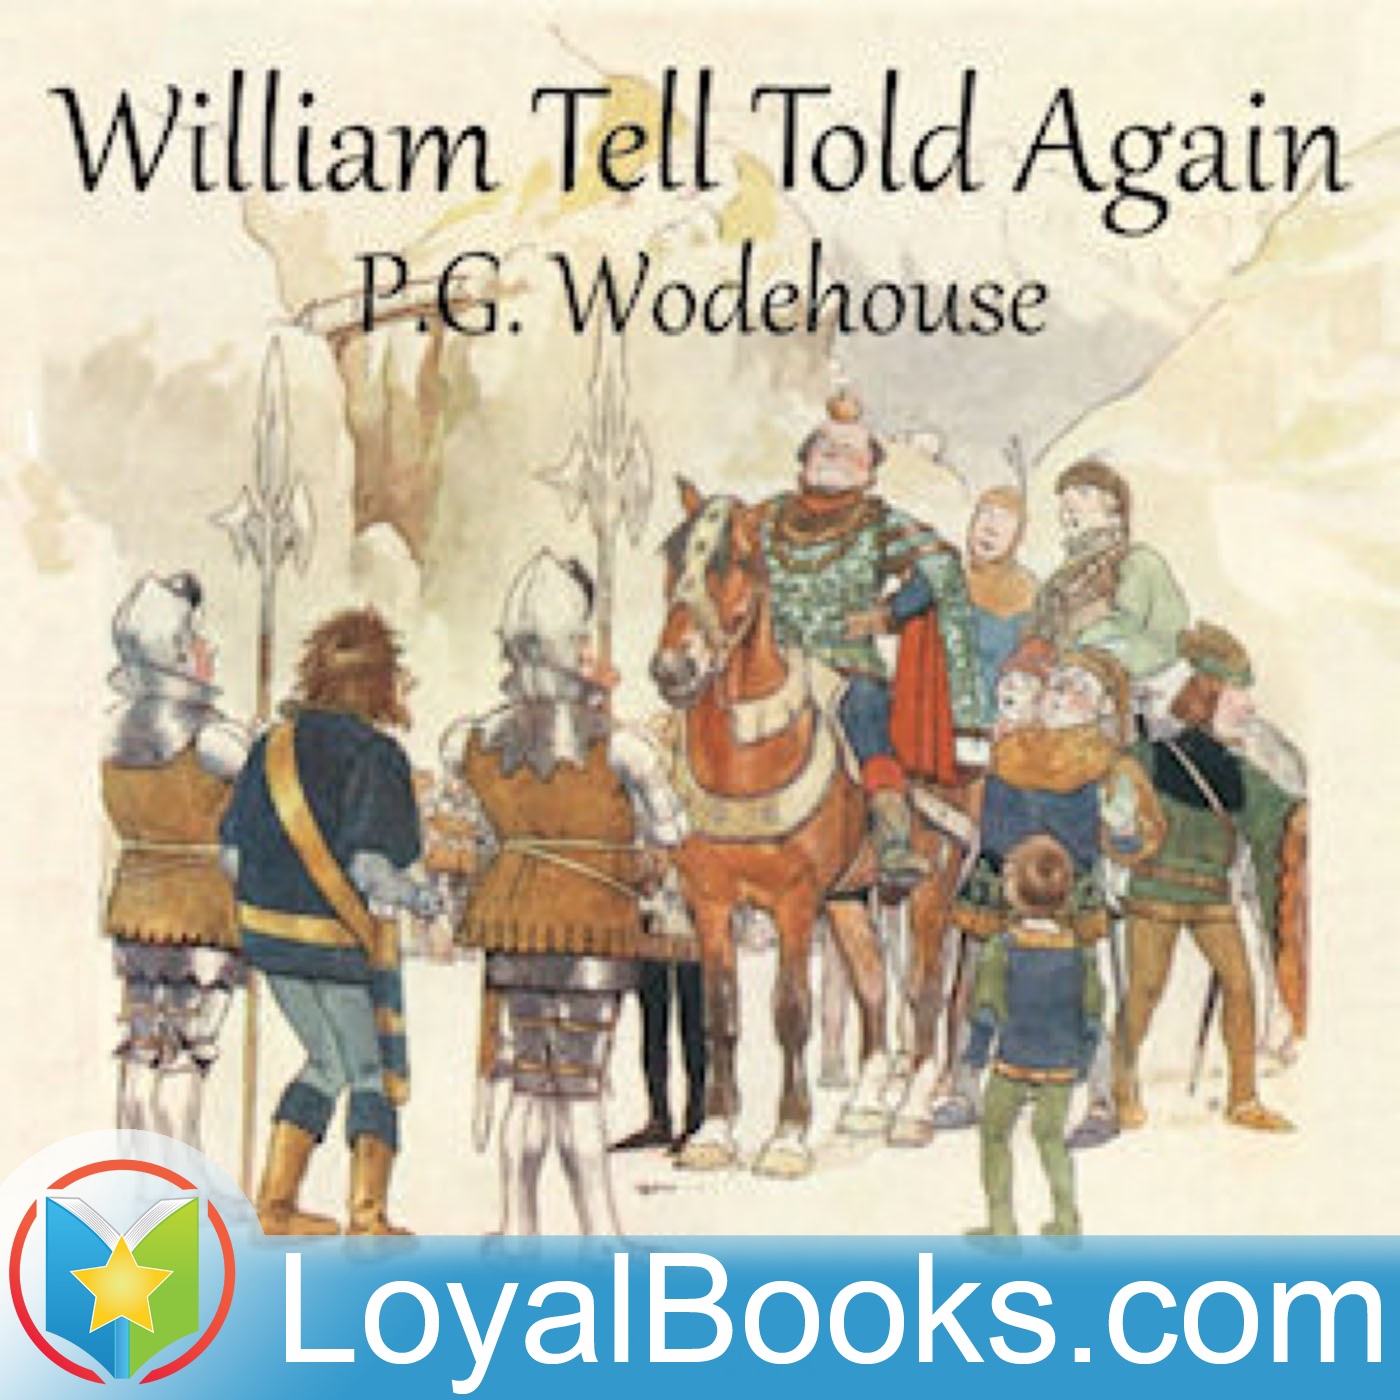 William Tell Told Again by P. G. Wodehouse